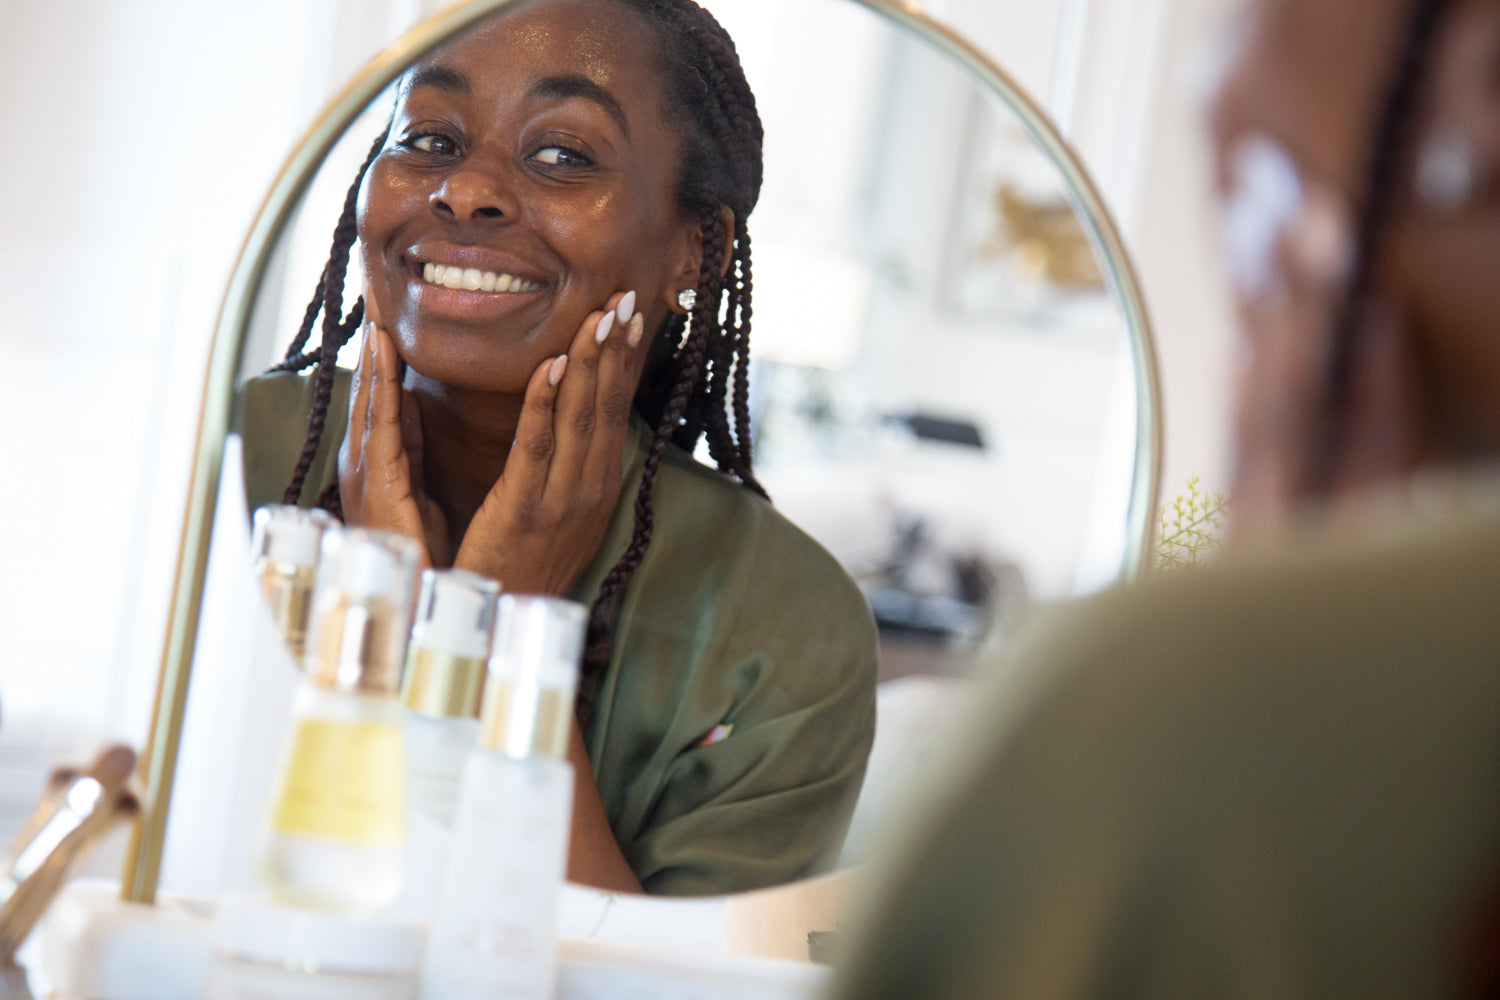 Woman with glowing skin applying product in the mirror